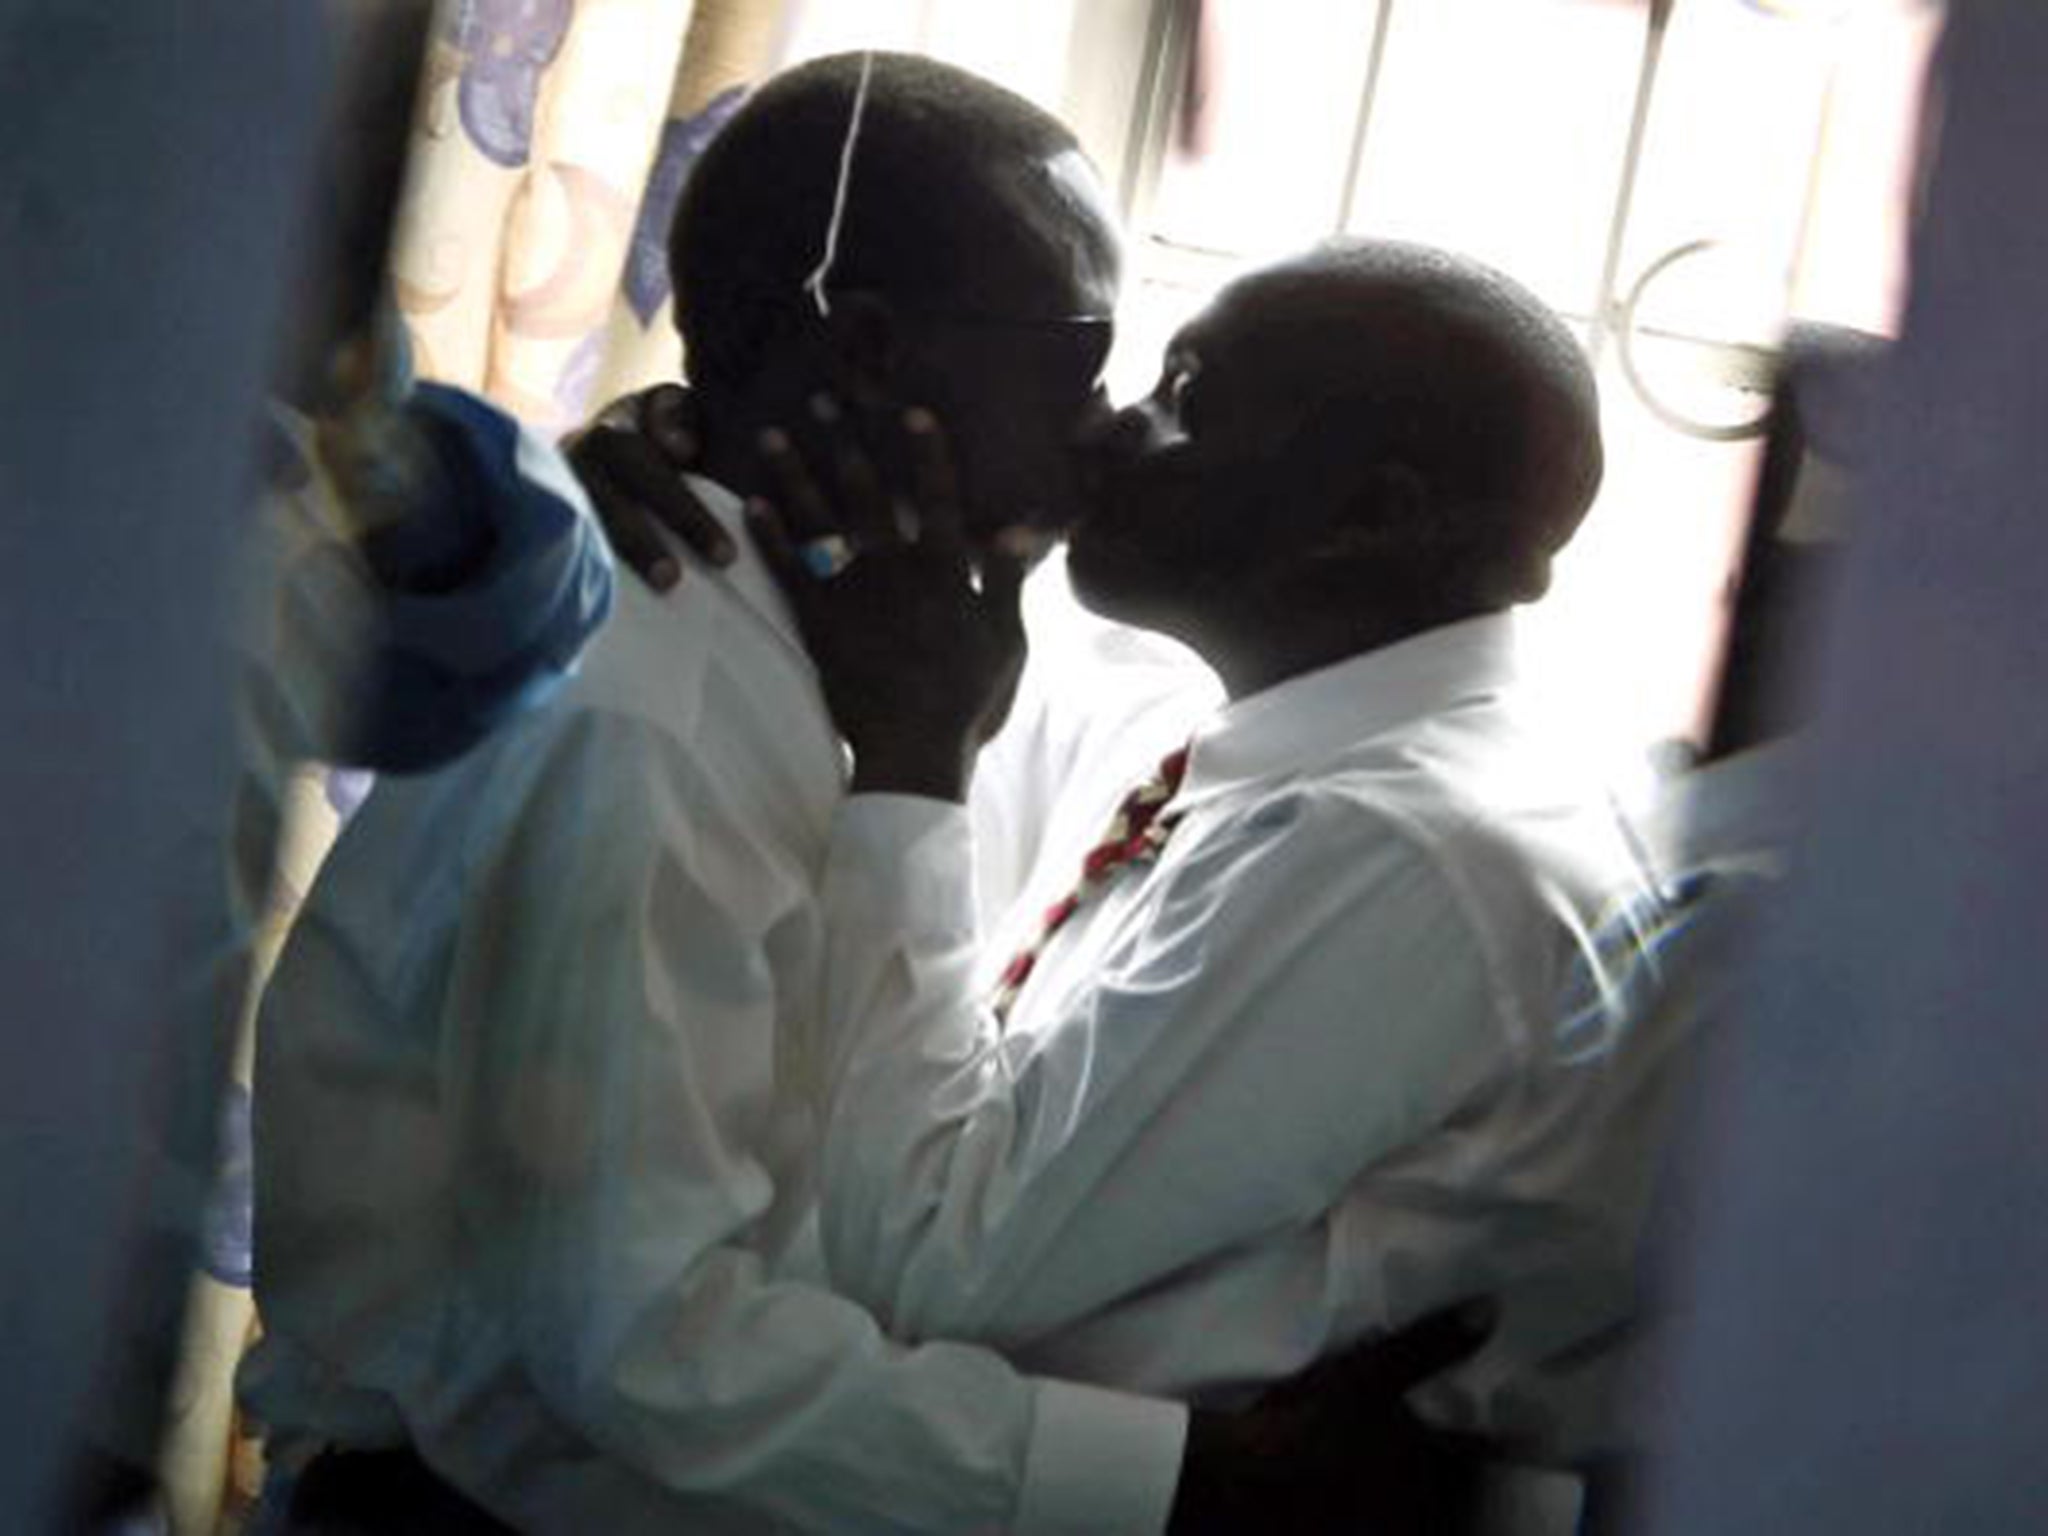 Two men kiss in Kenya, another country in east Africa where homosexuality is illegal